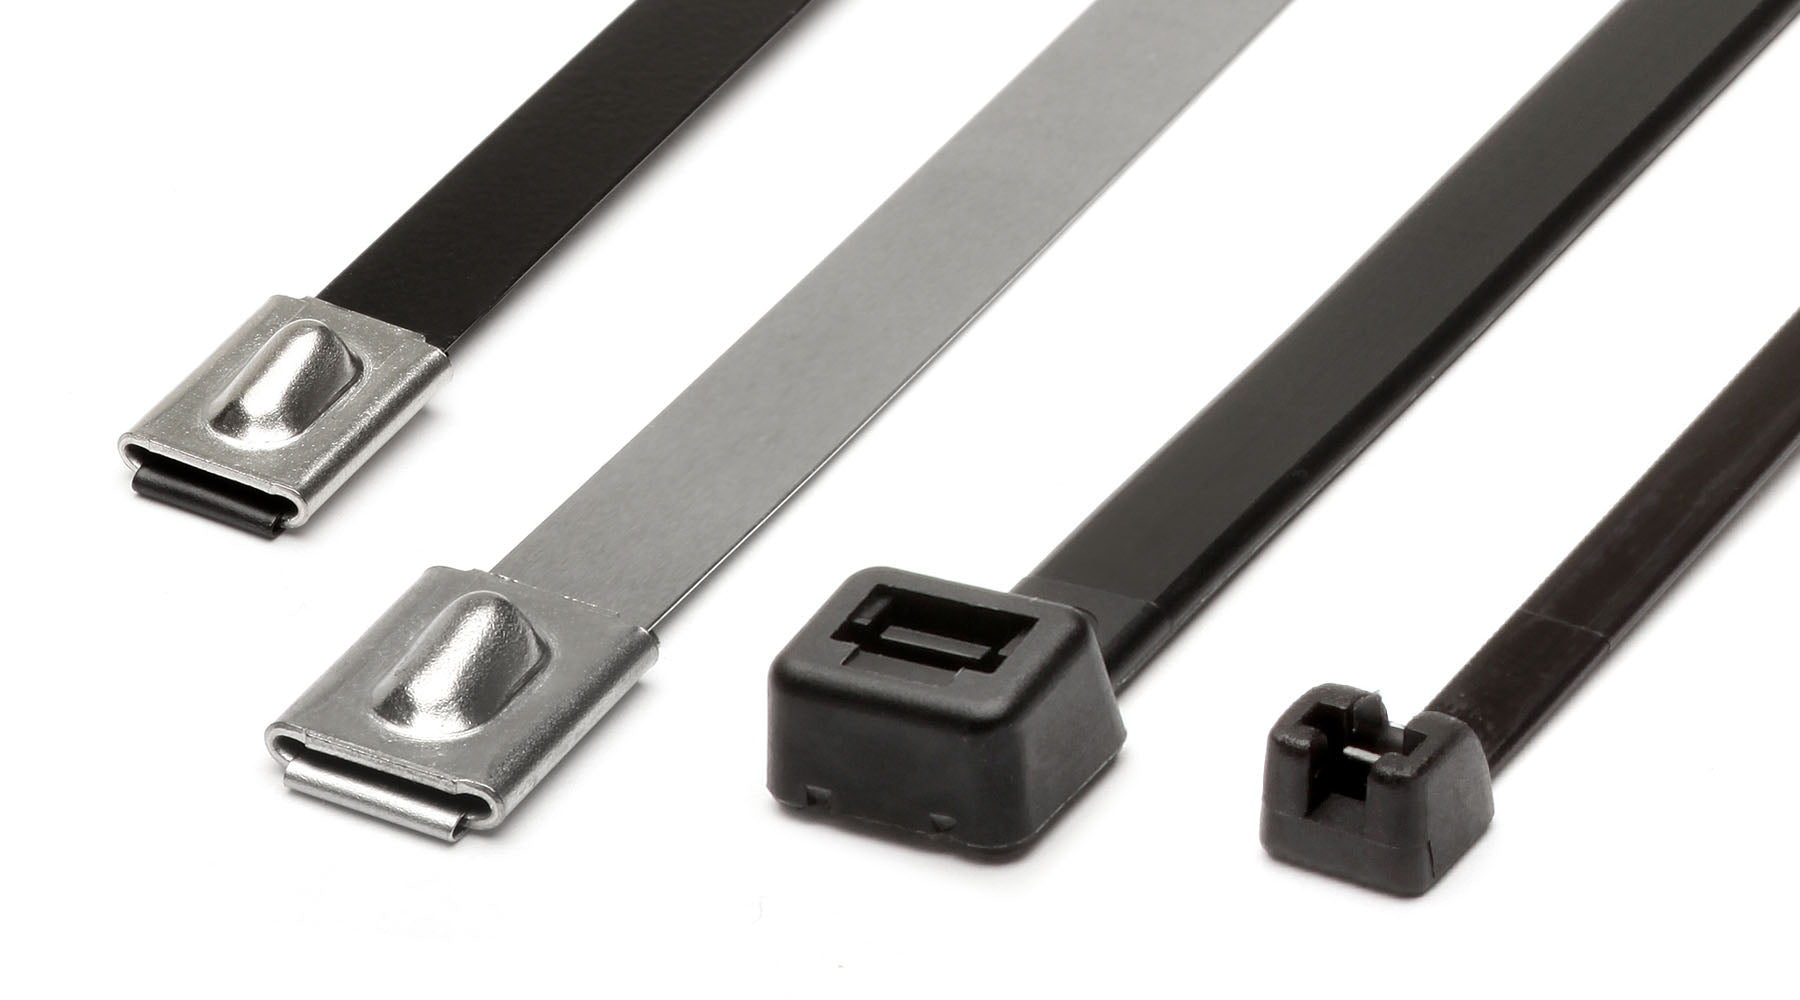 The Strongest Cable Ties Every Professional Needs to Know About